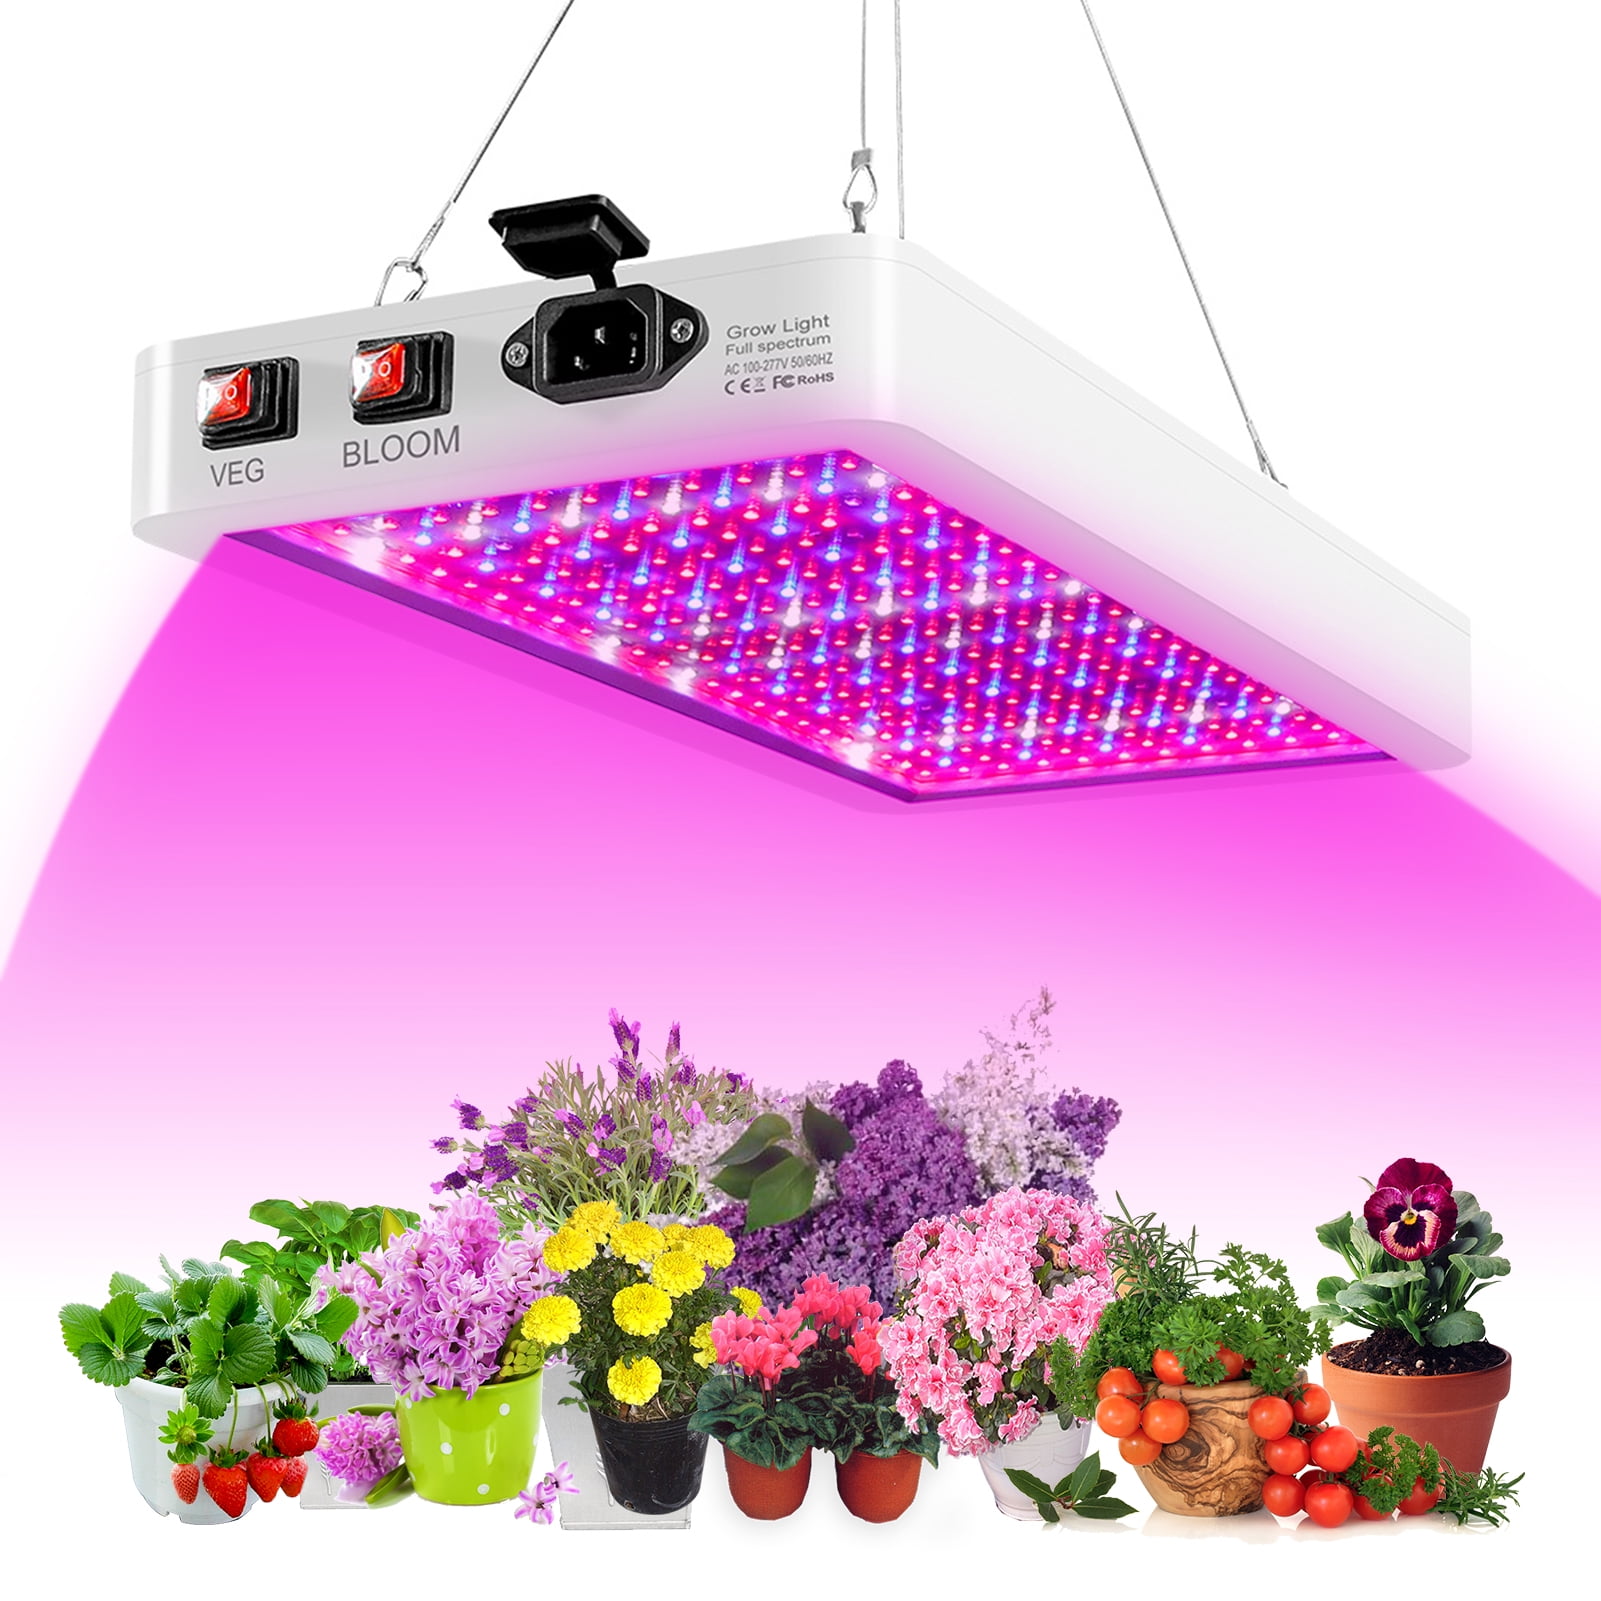 8000W LED Grow Lights Hydroponic Full Spectrum Indoor Plant Flower Growing Bloom 